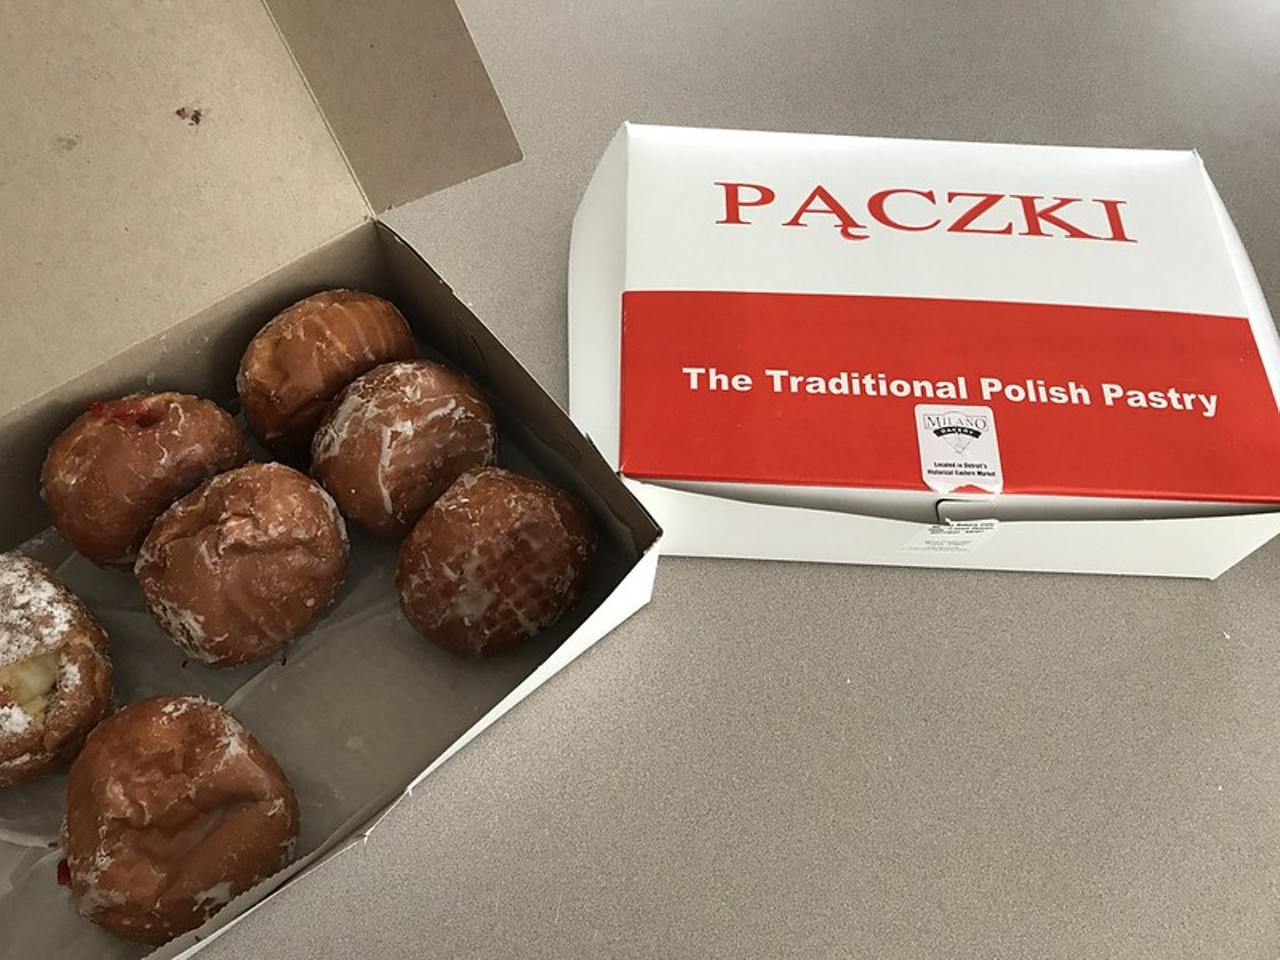 Paczki Day
Sure, New Orleans and St. Louis have Mardis Gras, but in Detroit, everyone’s a little Polish on Fat Tuesday.